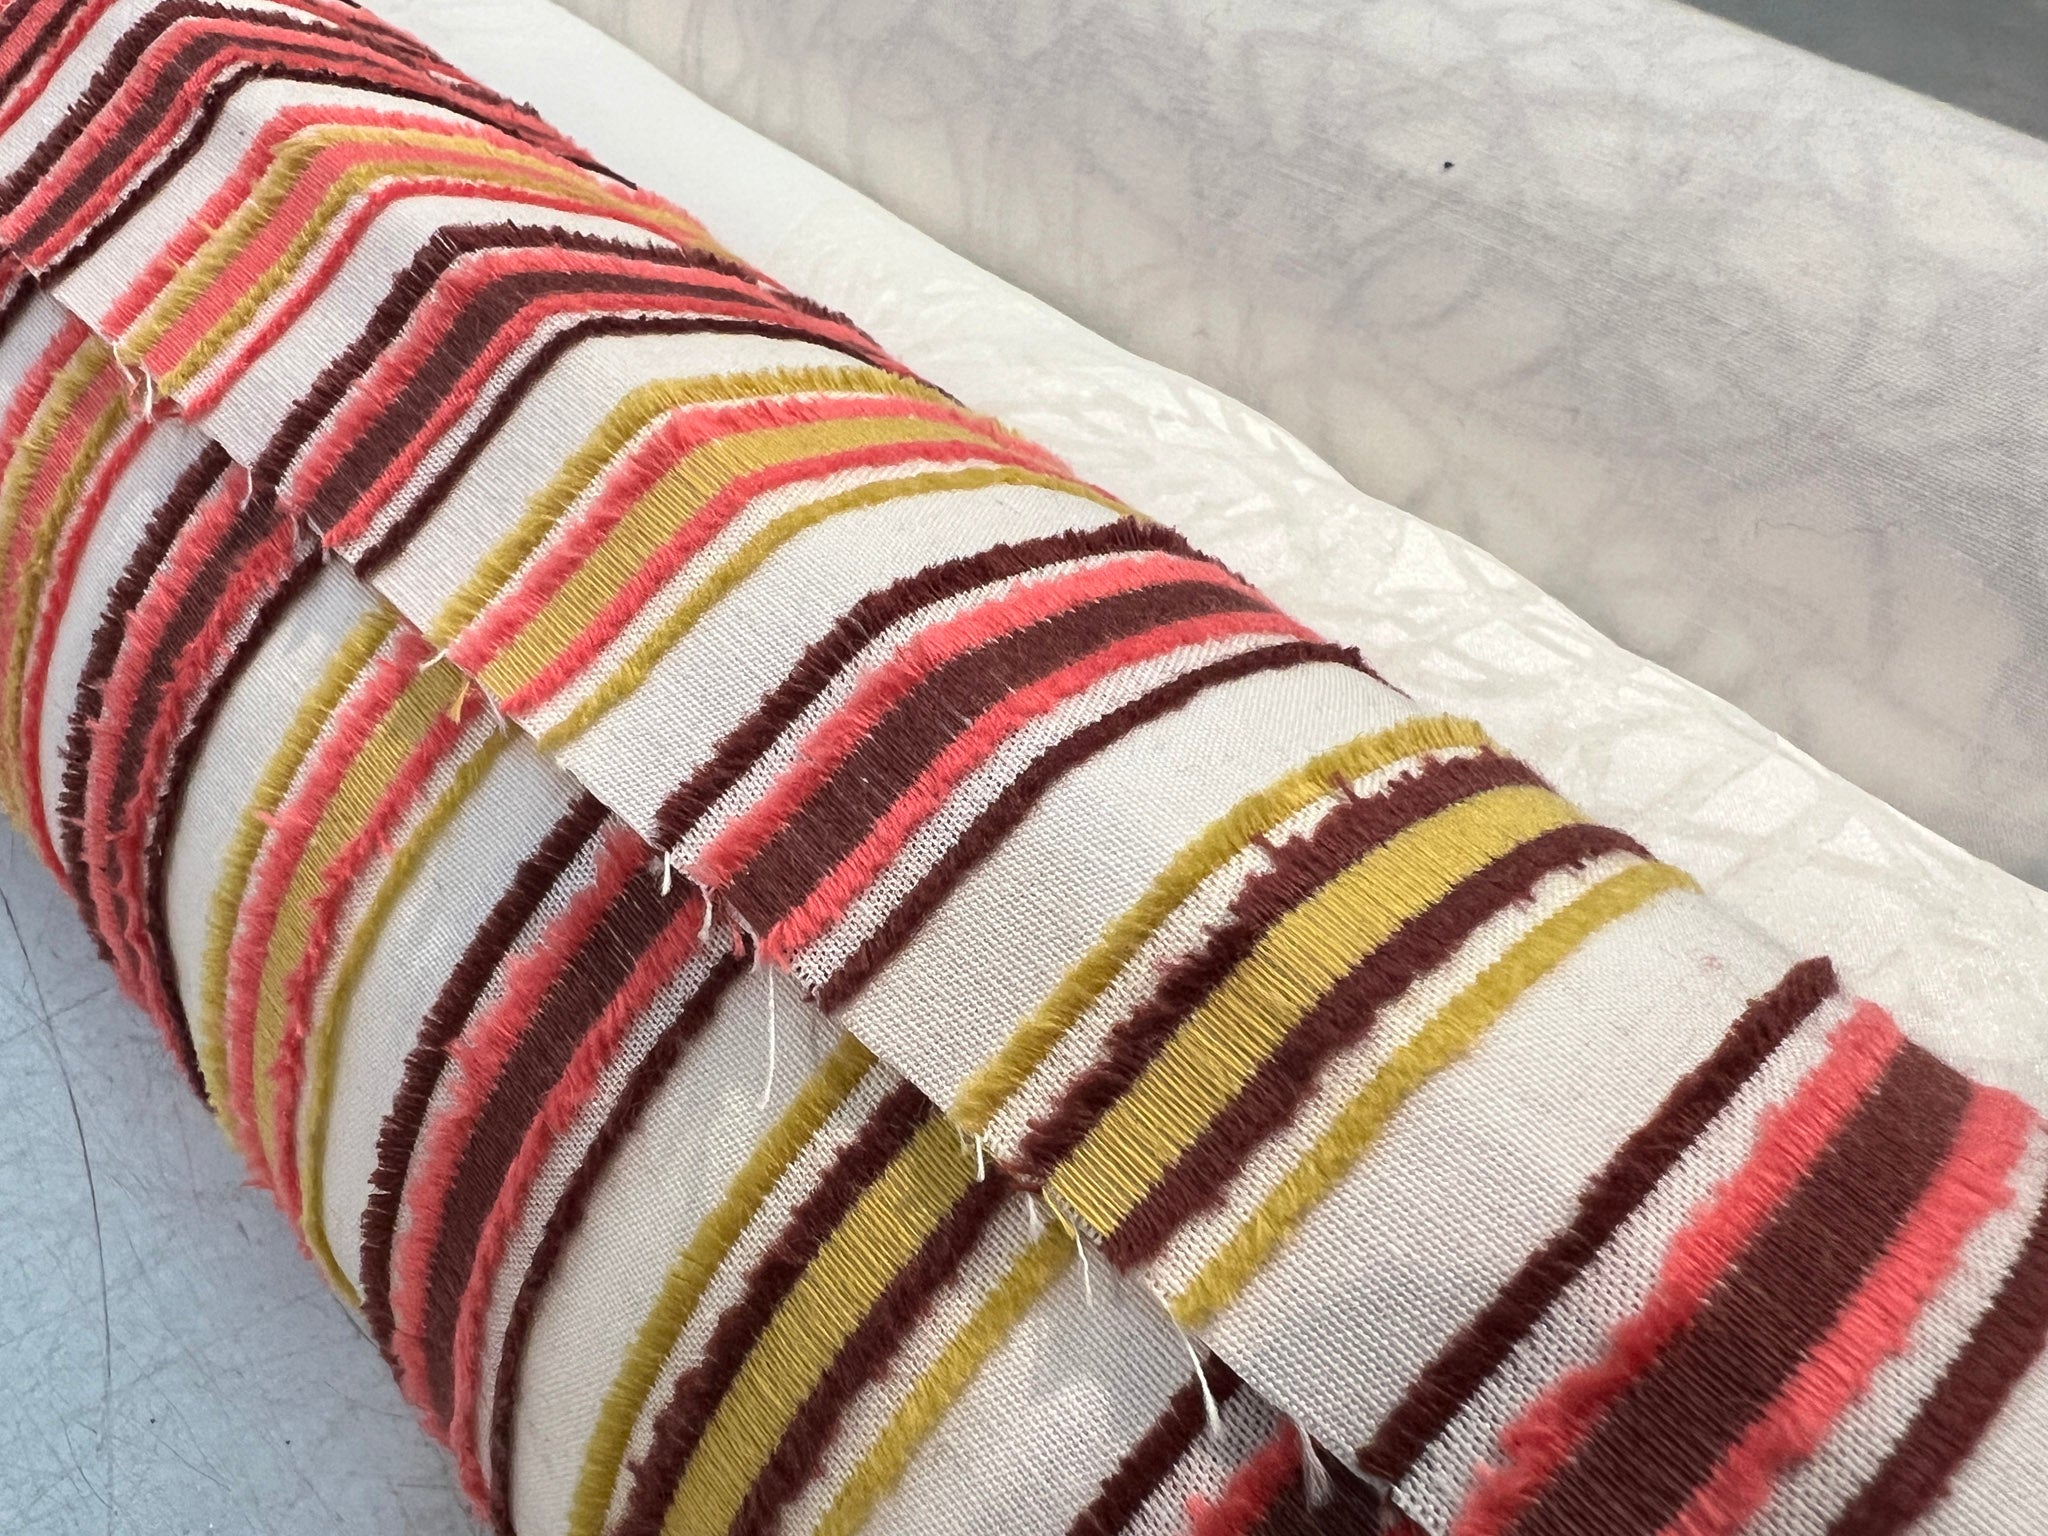 NUNO innovative textiles: a jacquard-woven cotton where the stripes are created using the weft